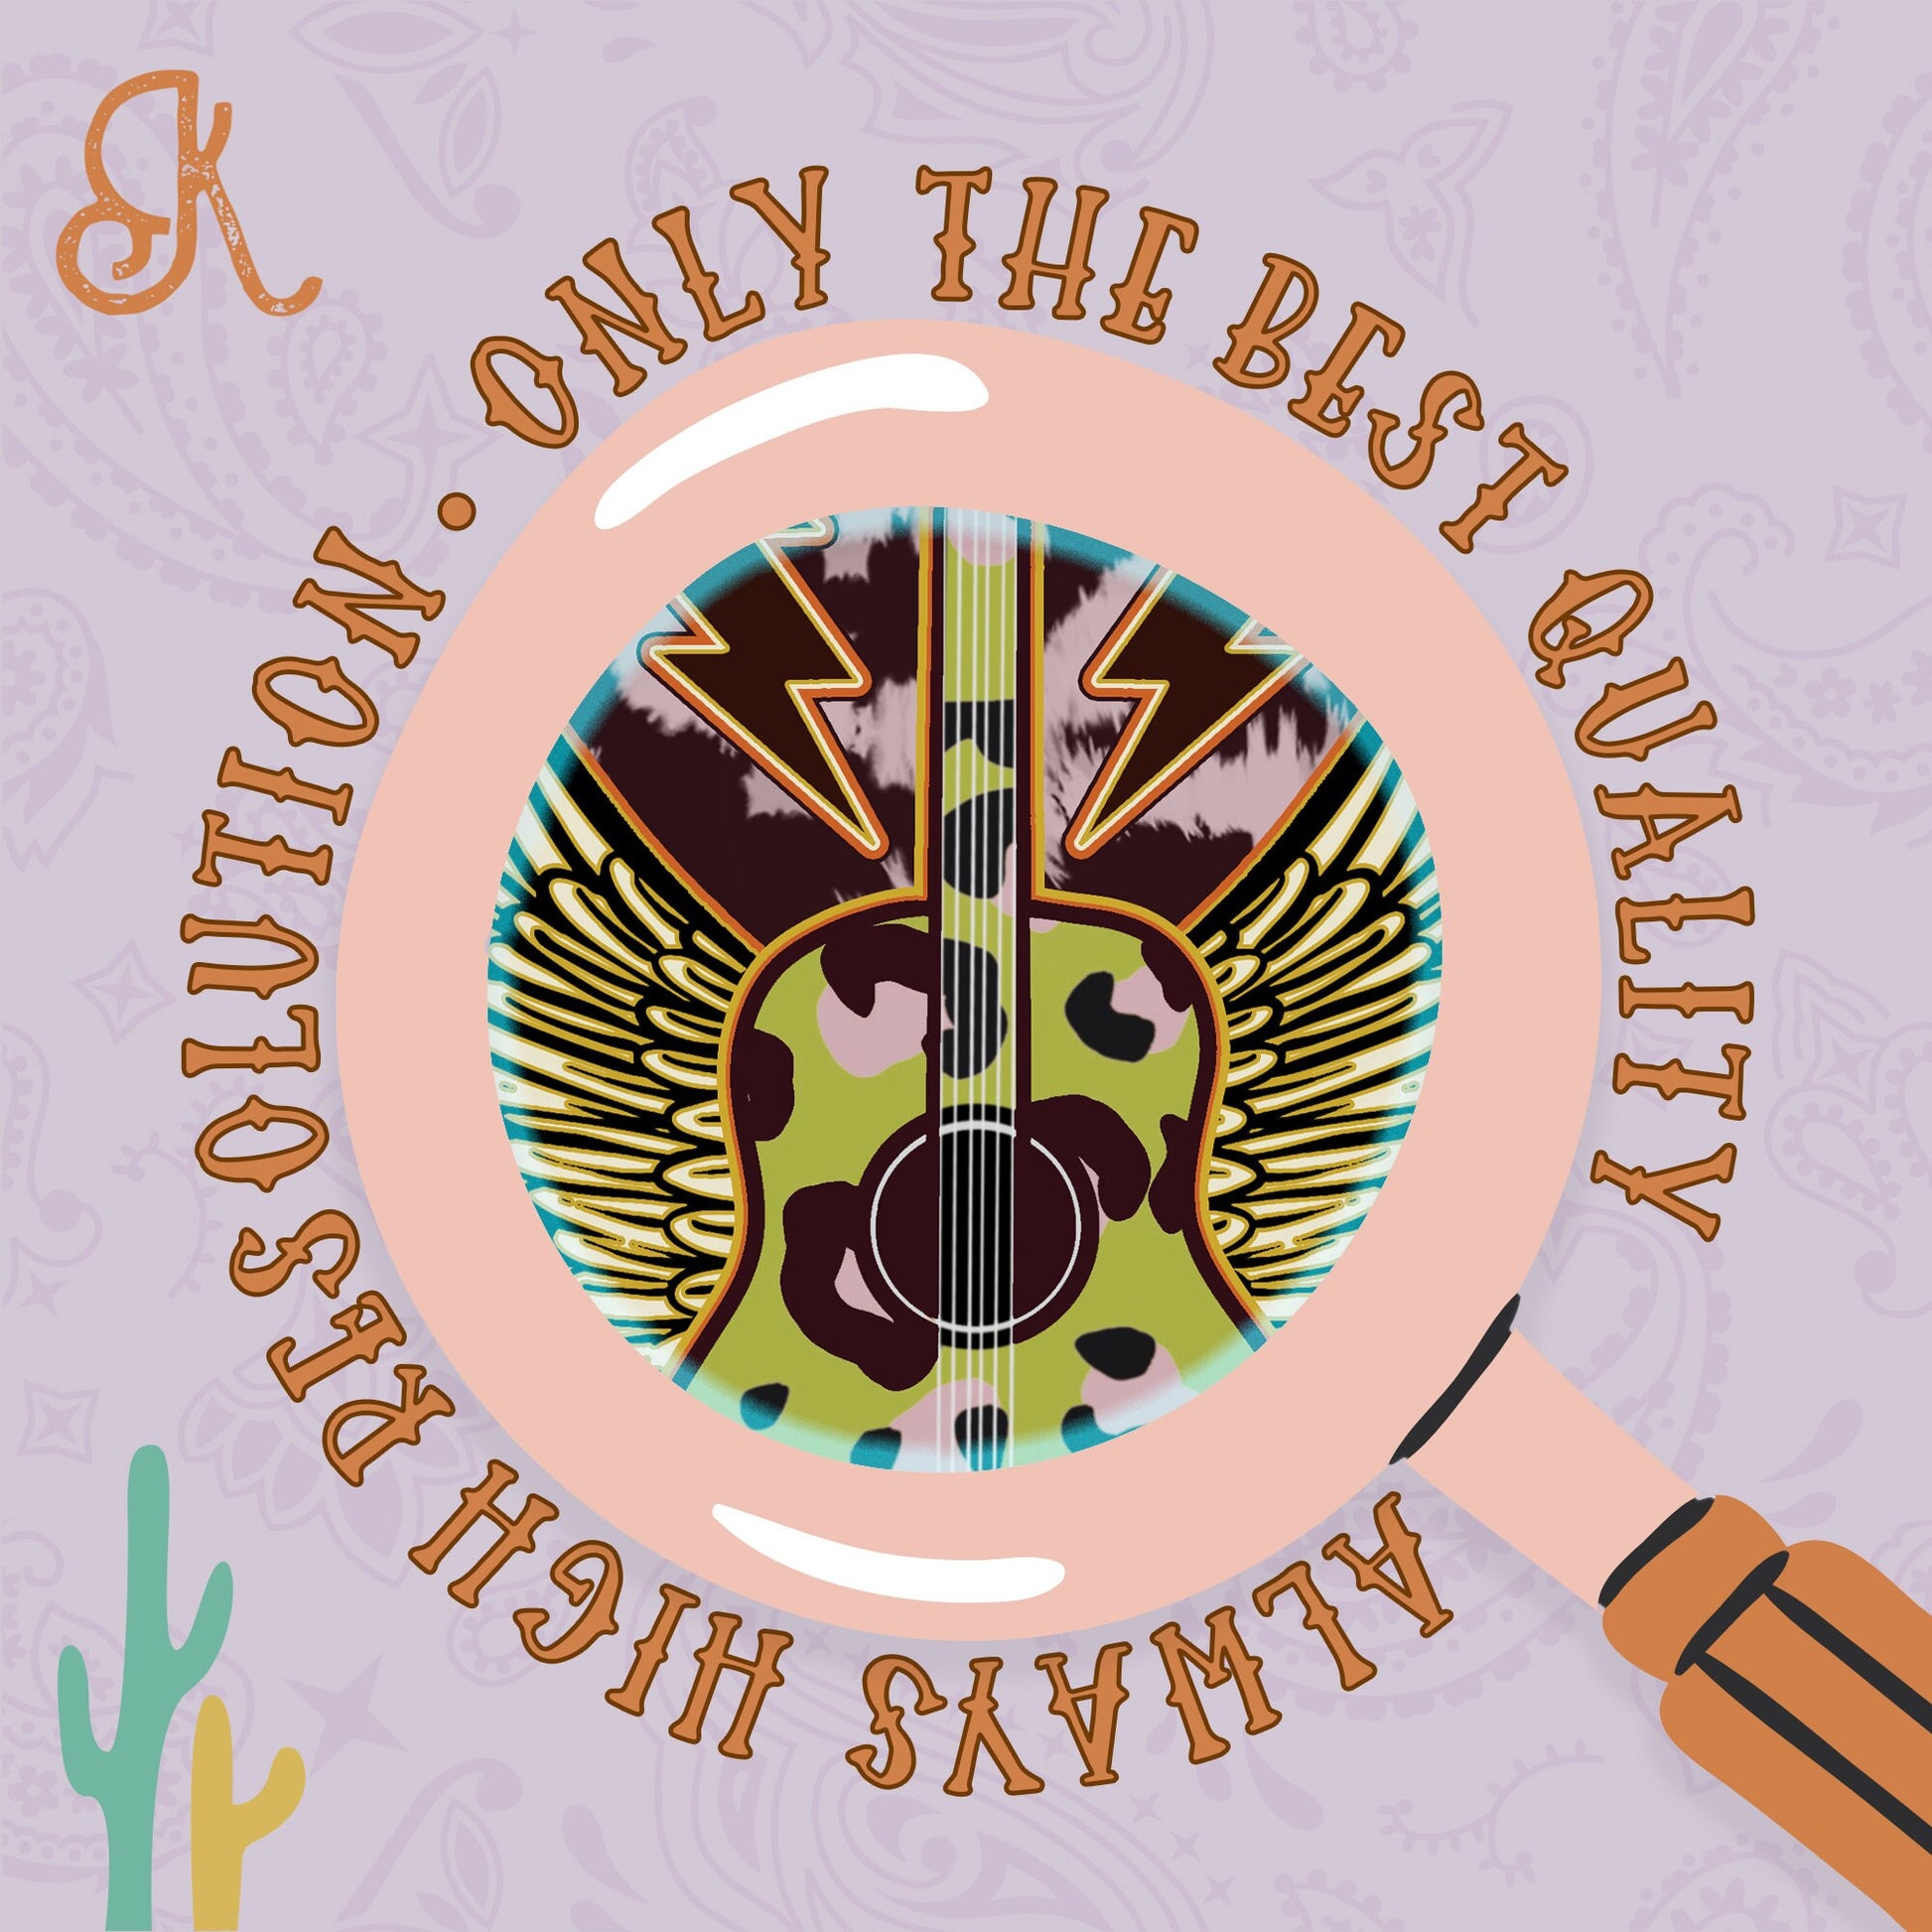 Music City Dark Sublimation Design PNG Digital Download Printable Retro Groovy Country Retro Band Guitar Wings Leopard 70s Seventies